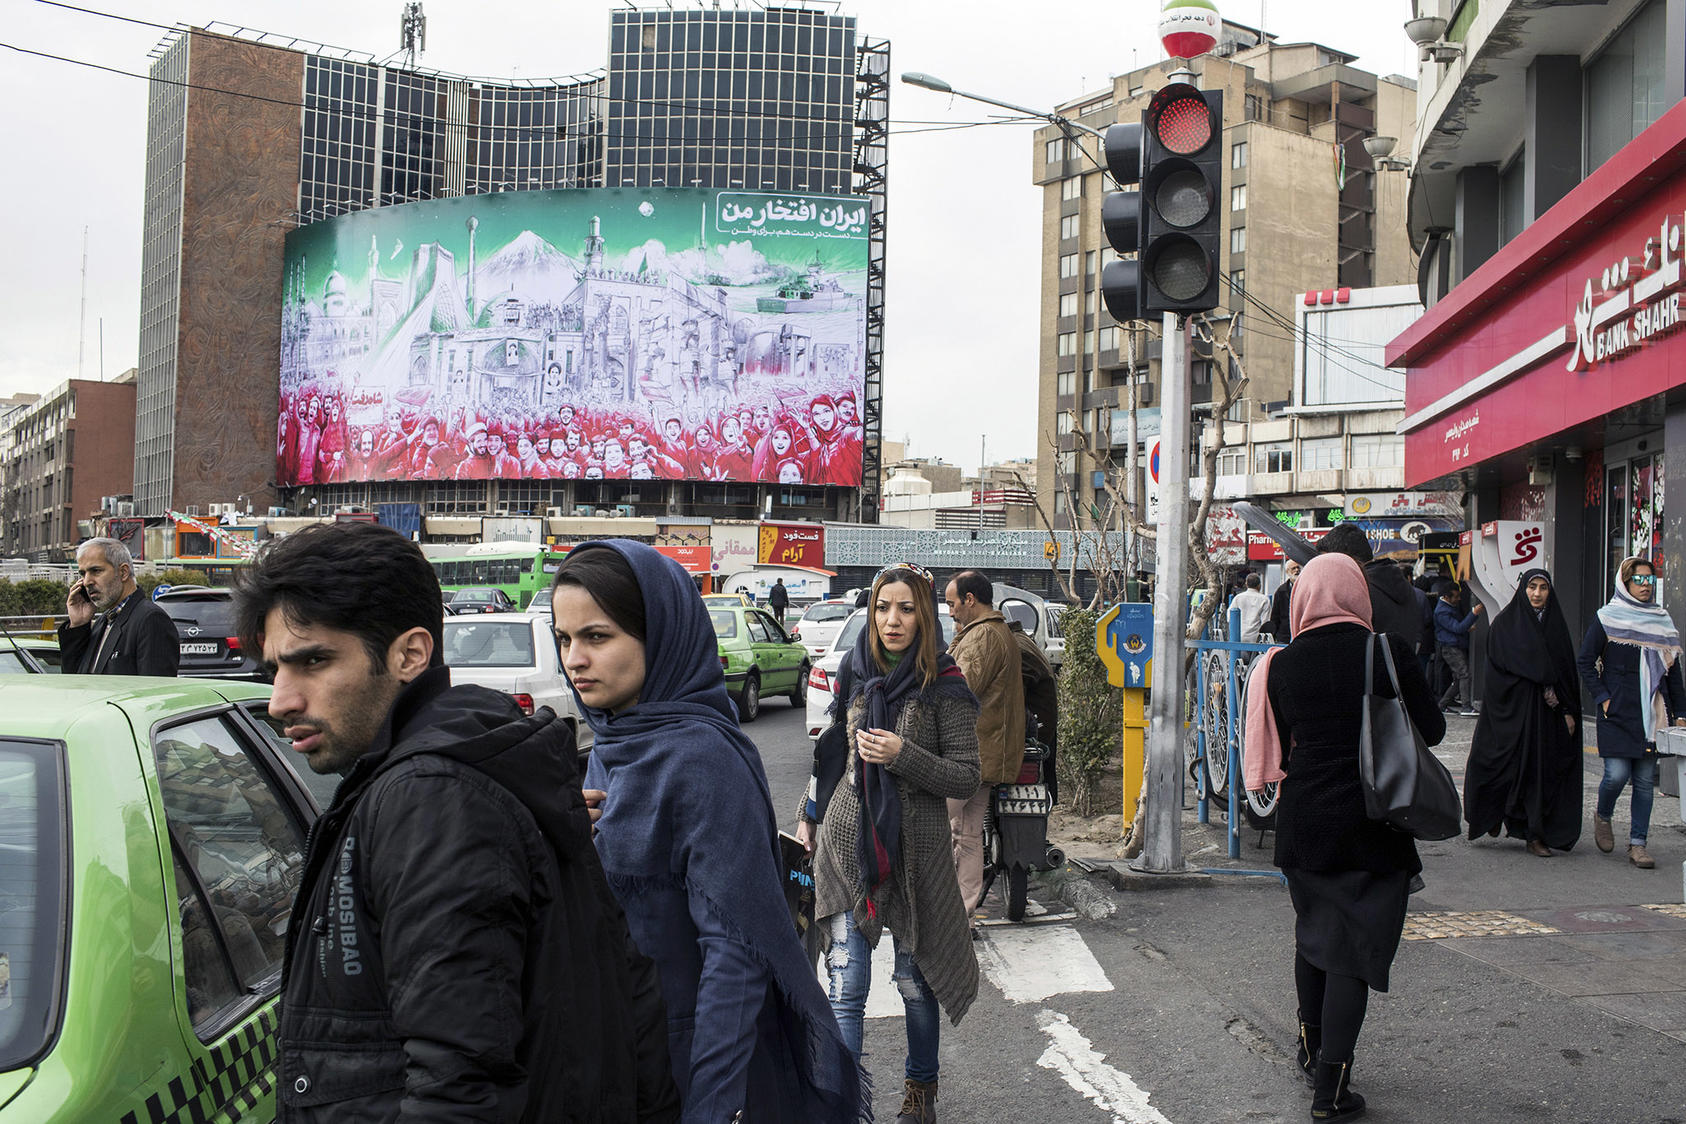 Iranians negotiate Tehran’s traffic in February beneath a mural depicting the 1979 Islamic Revolution. U.S. sanctions, heightened this week, aim to pressure Iran’s government into making broad foreign policy changes. (Arash Khamooshi/The New York Times)